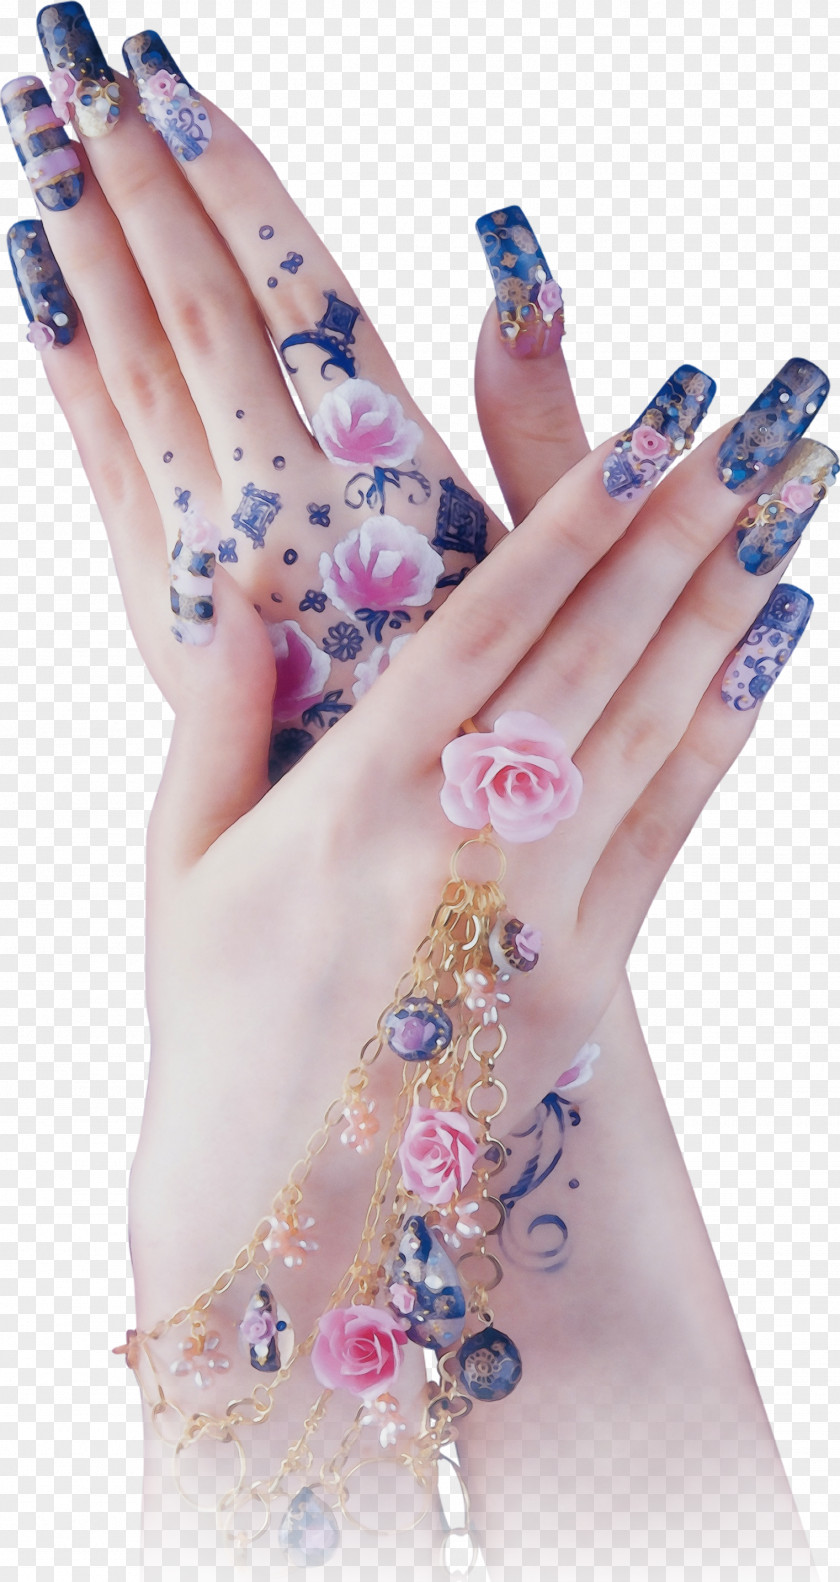 Artificial Nails Wrist Nail Finger Hand Care Temporary Tattoo PNG